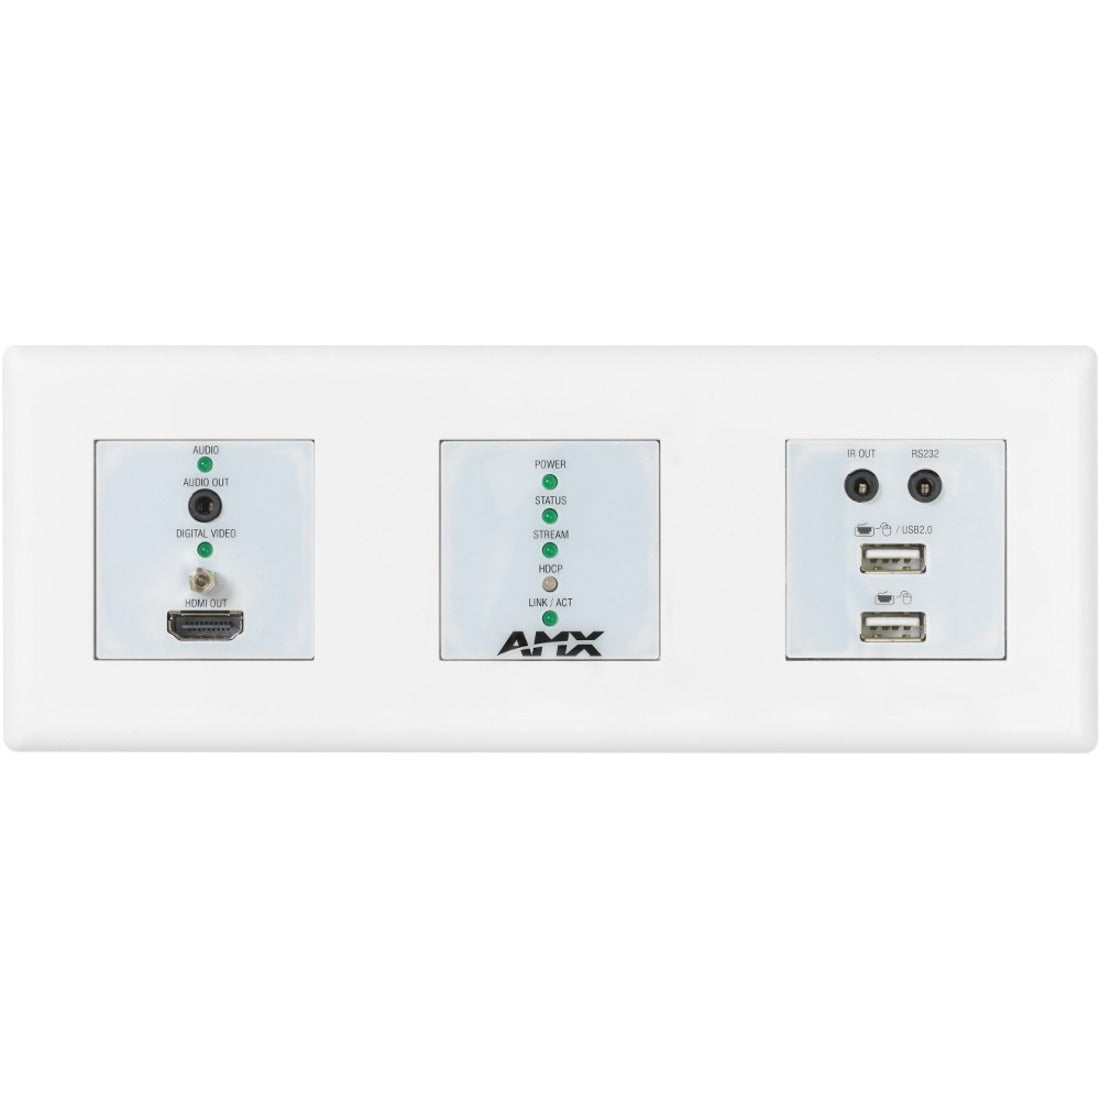 AMX AMX-N26D012 NMX-DEC-N2625-WP Decoder Wallplate, HDMI Port, for Corporate, Casino, Hospitality, Government